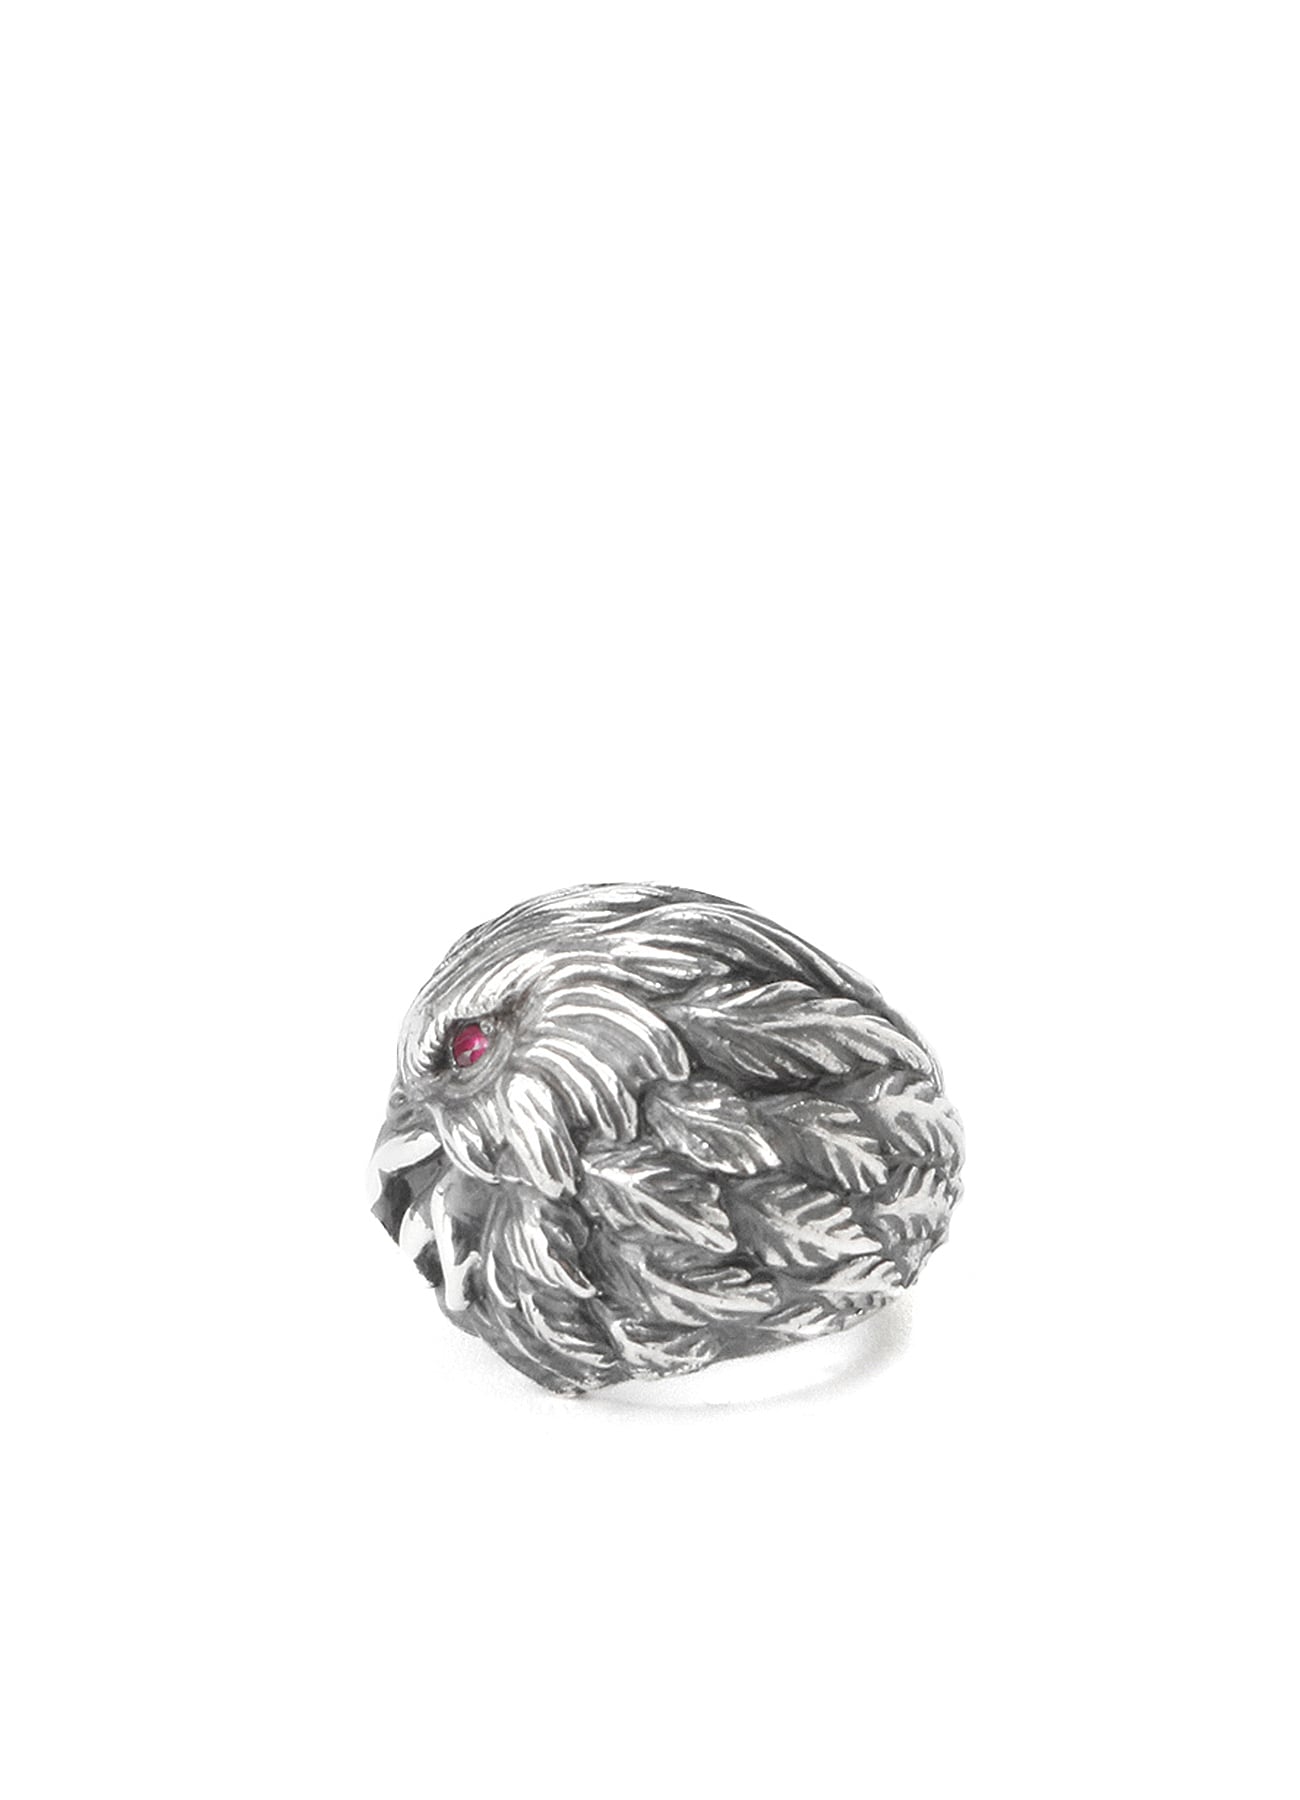 SILVER 950 EAGLE RED EYE RING